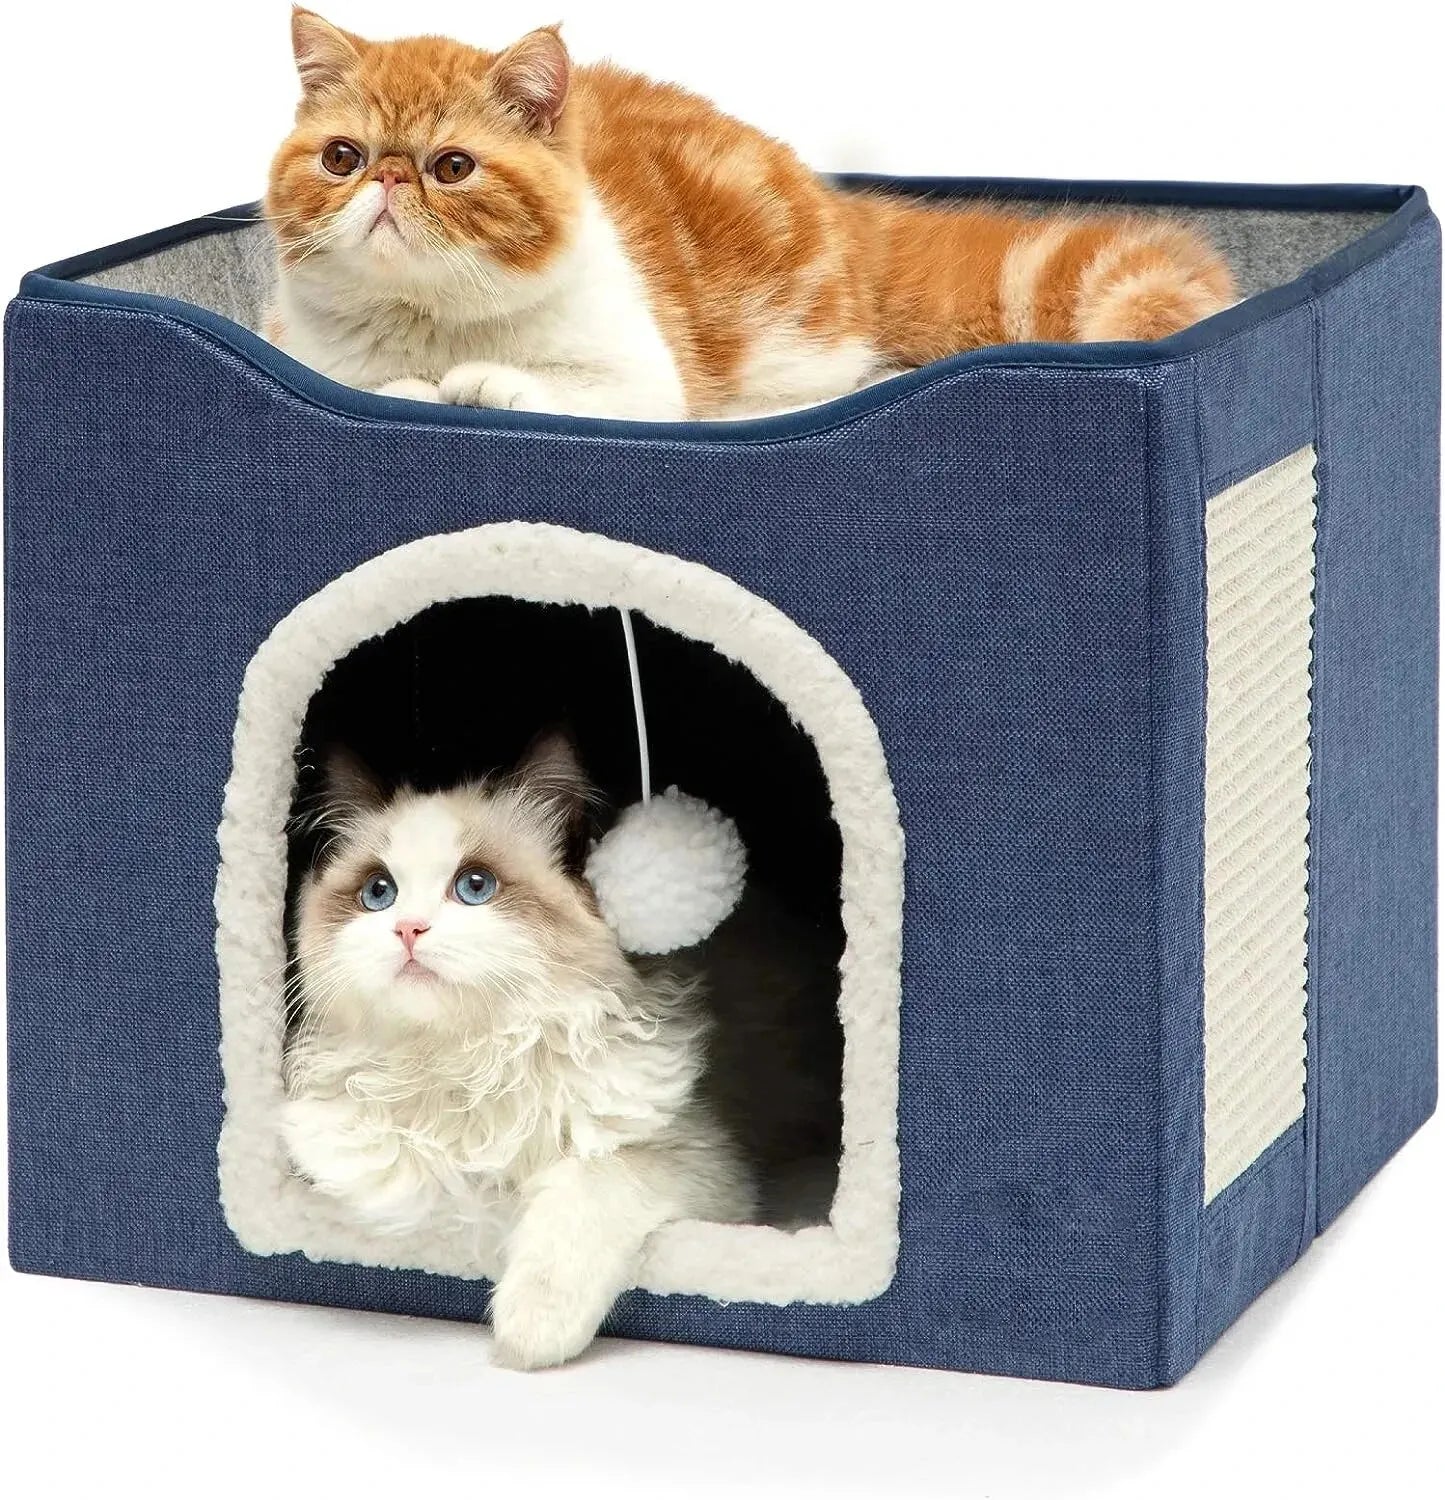 Foldable Double-Layered Large Cat Bed